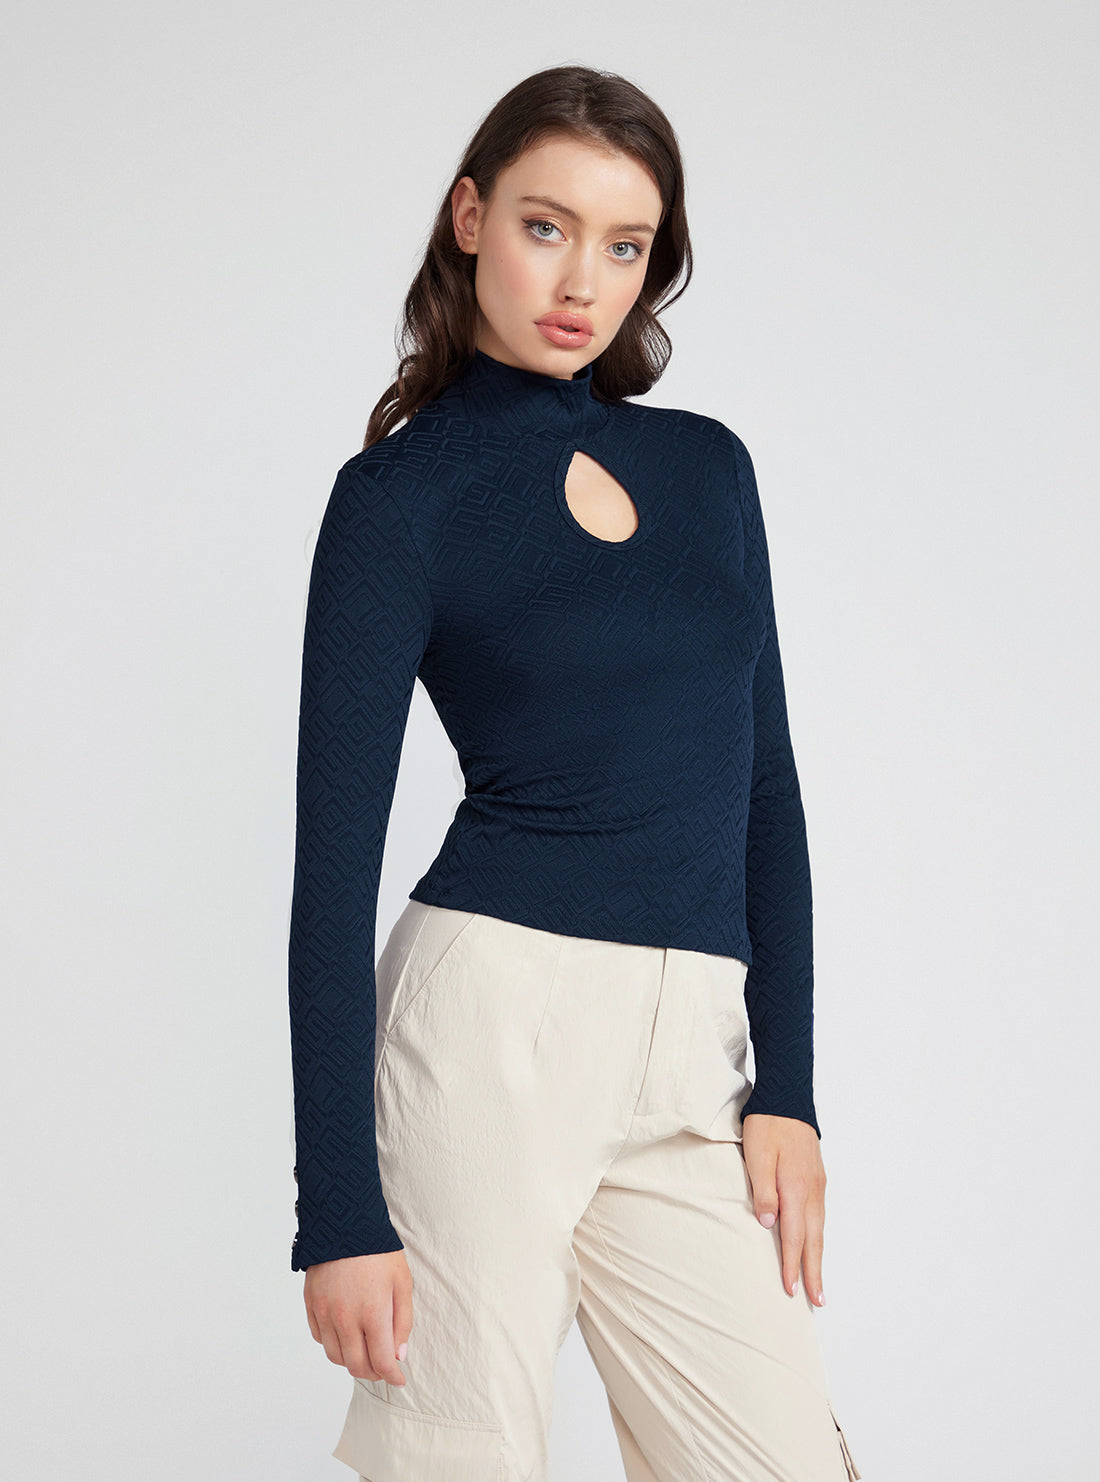 Navy Blue Clio Long Sleeve Top | GUESS Women's Apparel | front view